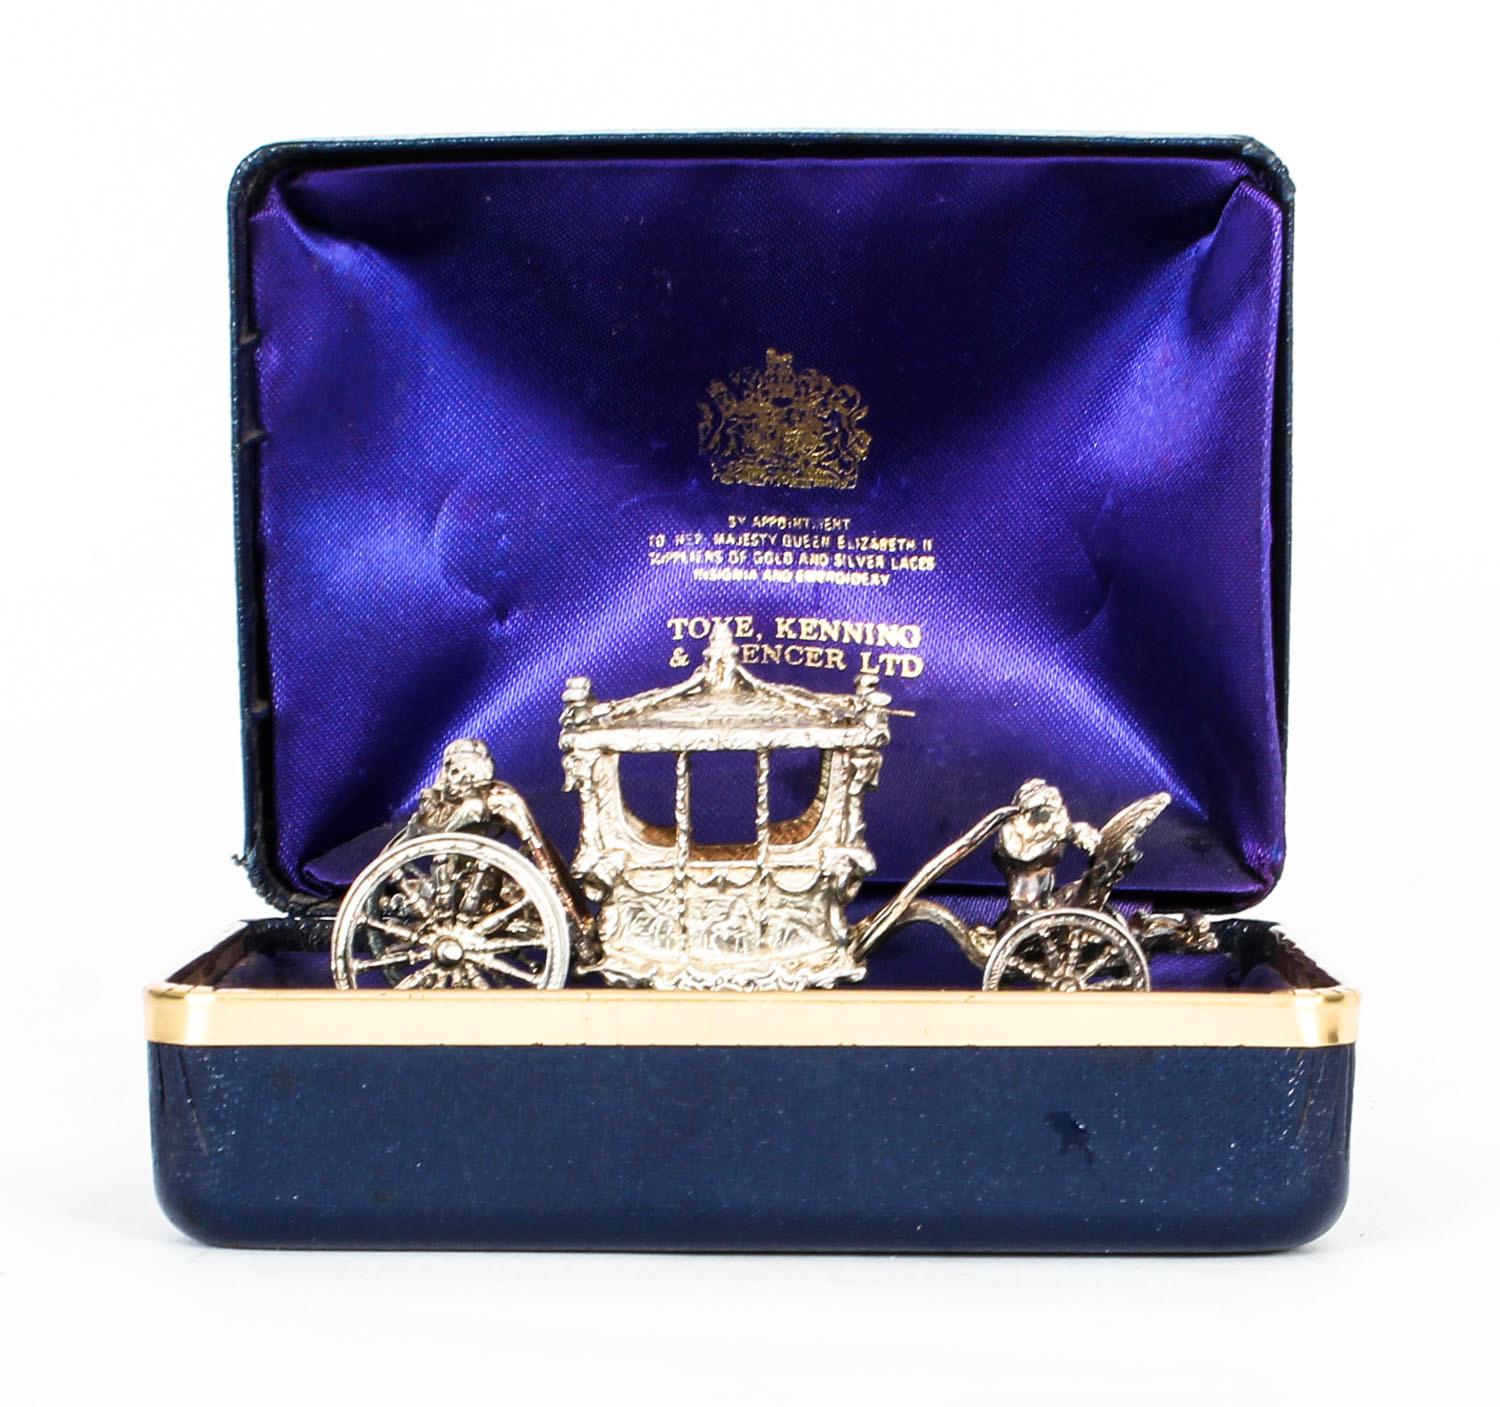 An attractive silver model of the Queen's coronation coach, hallmarked for Birmingham 1977, with the makers mark for Toye, Kenning & Spencer Ltd

In the original leatherbound case, with purple silk lining printed in gold with the maker, toye,